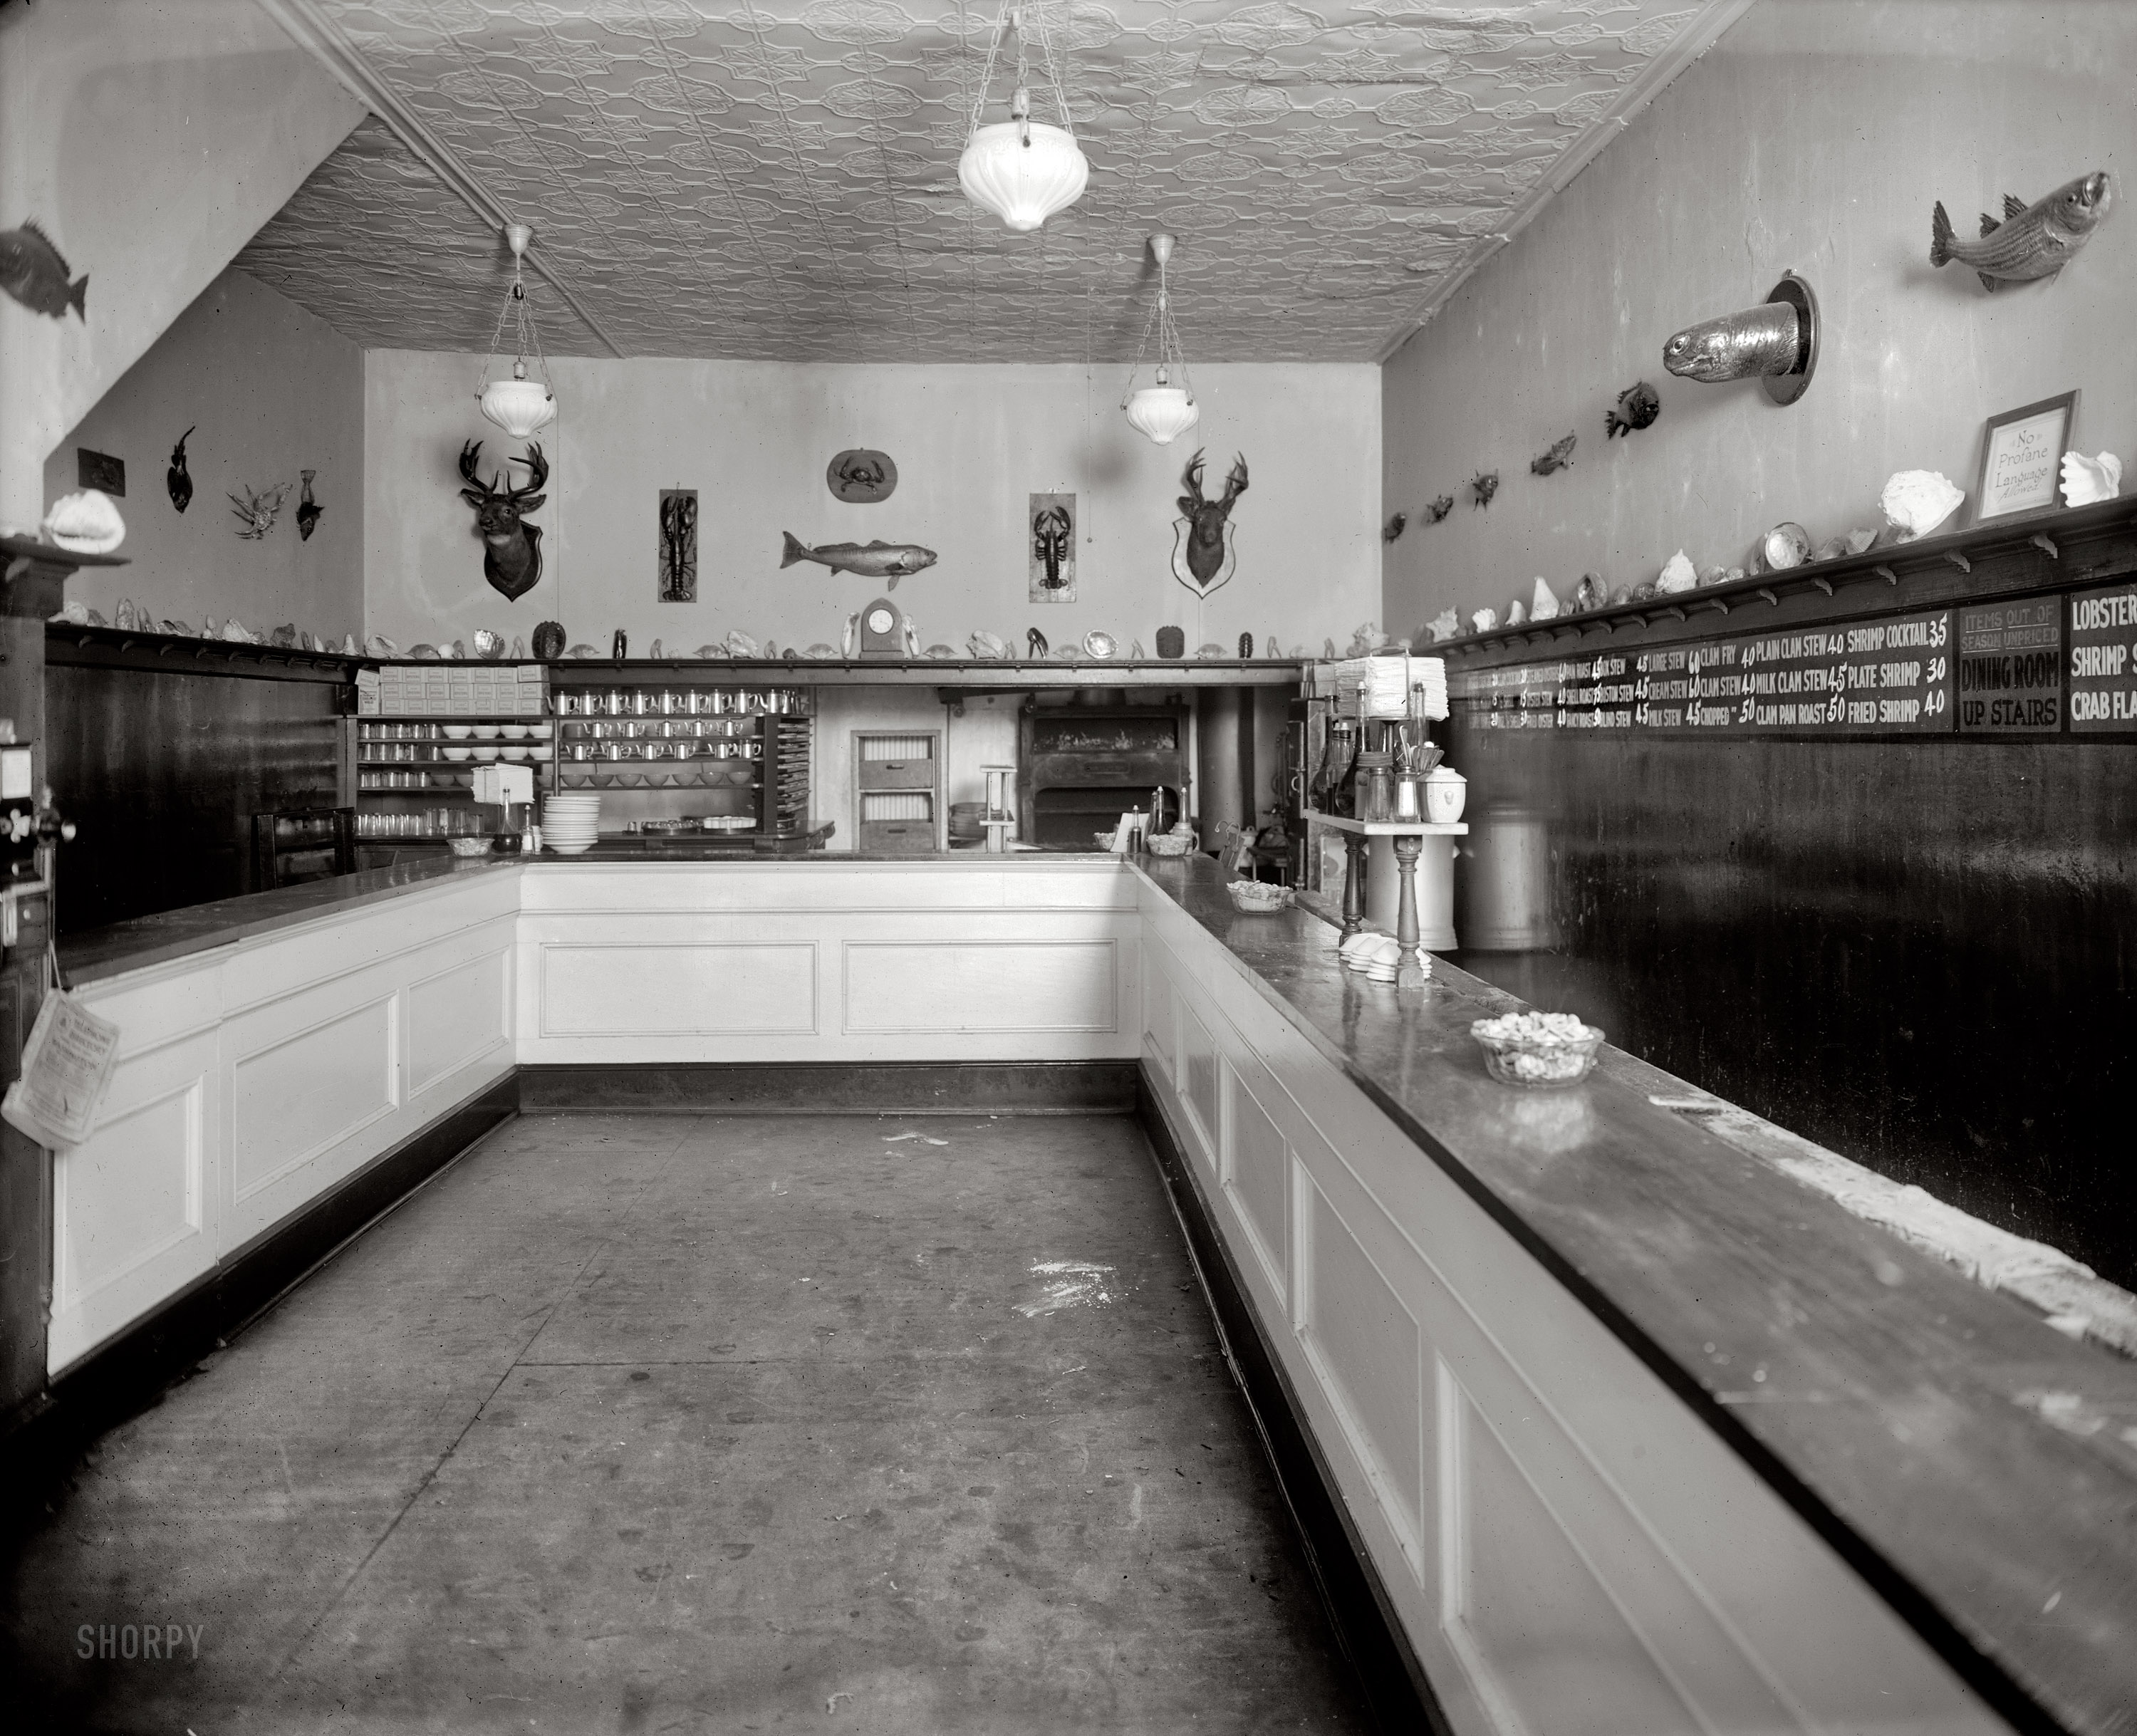 Washington, D.C., circa 1922. "Wearley's Oyster House, 12th Street." With toothsome fare priced for every purse (Plain Clam Stew 40¢; Milk Clam Stew 45¢). Please Do Not Touch the Turtle. National Photo Company. View full size.